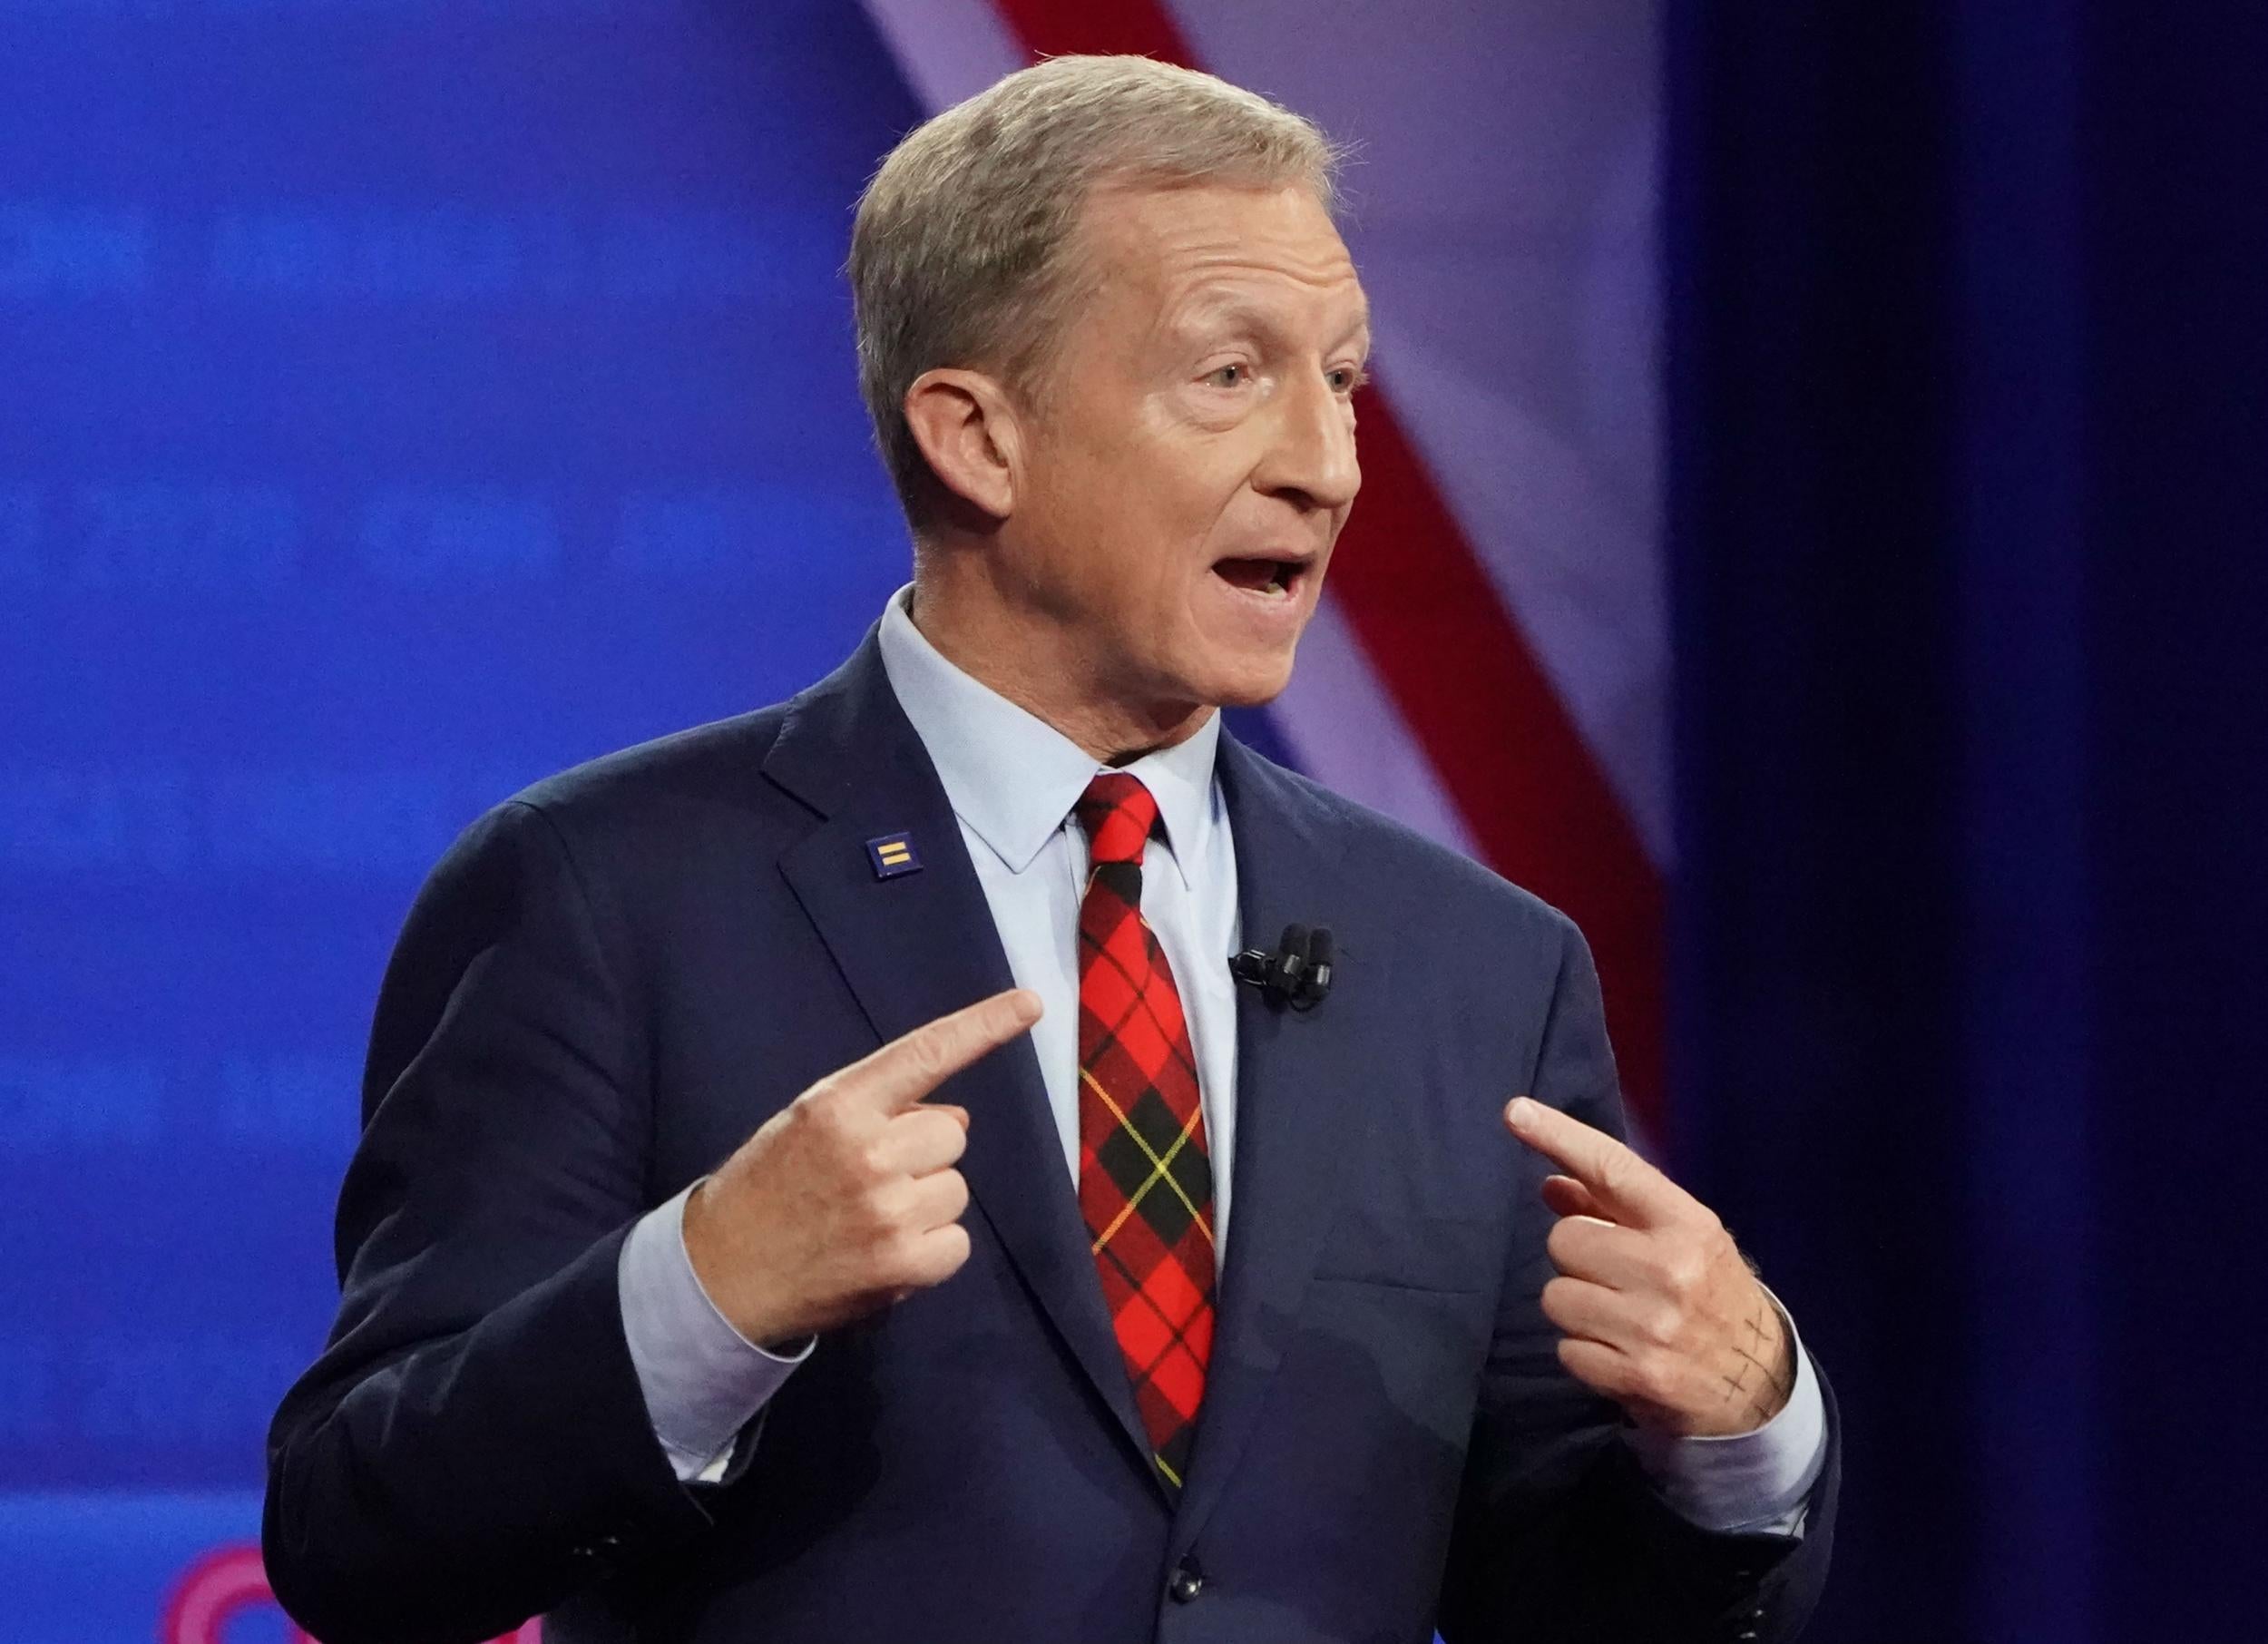 The 62-year-old billionaire was among 12 Democratic candidates debating in Ohio